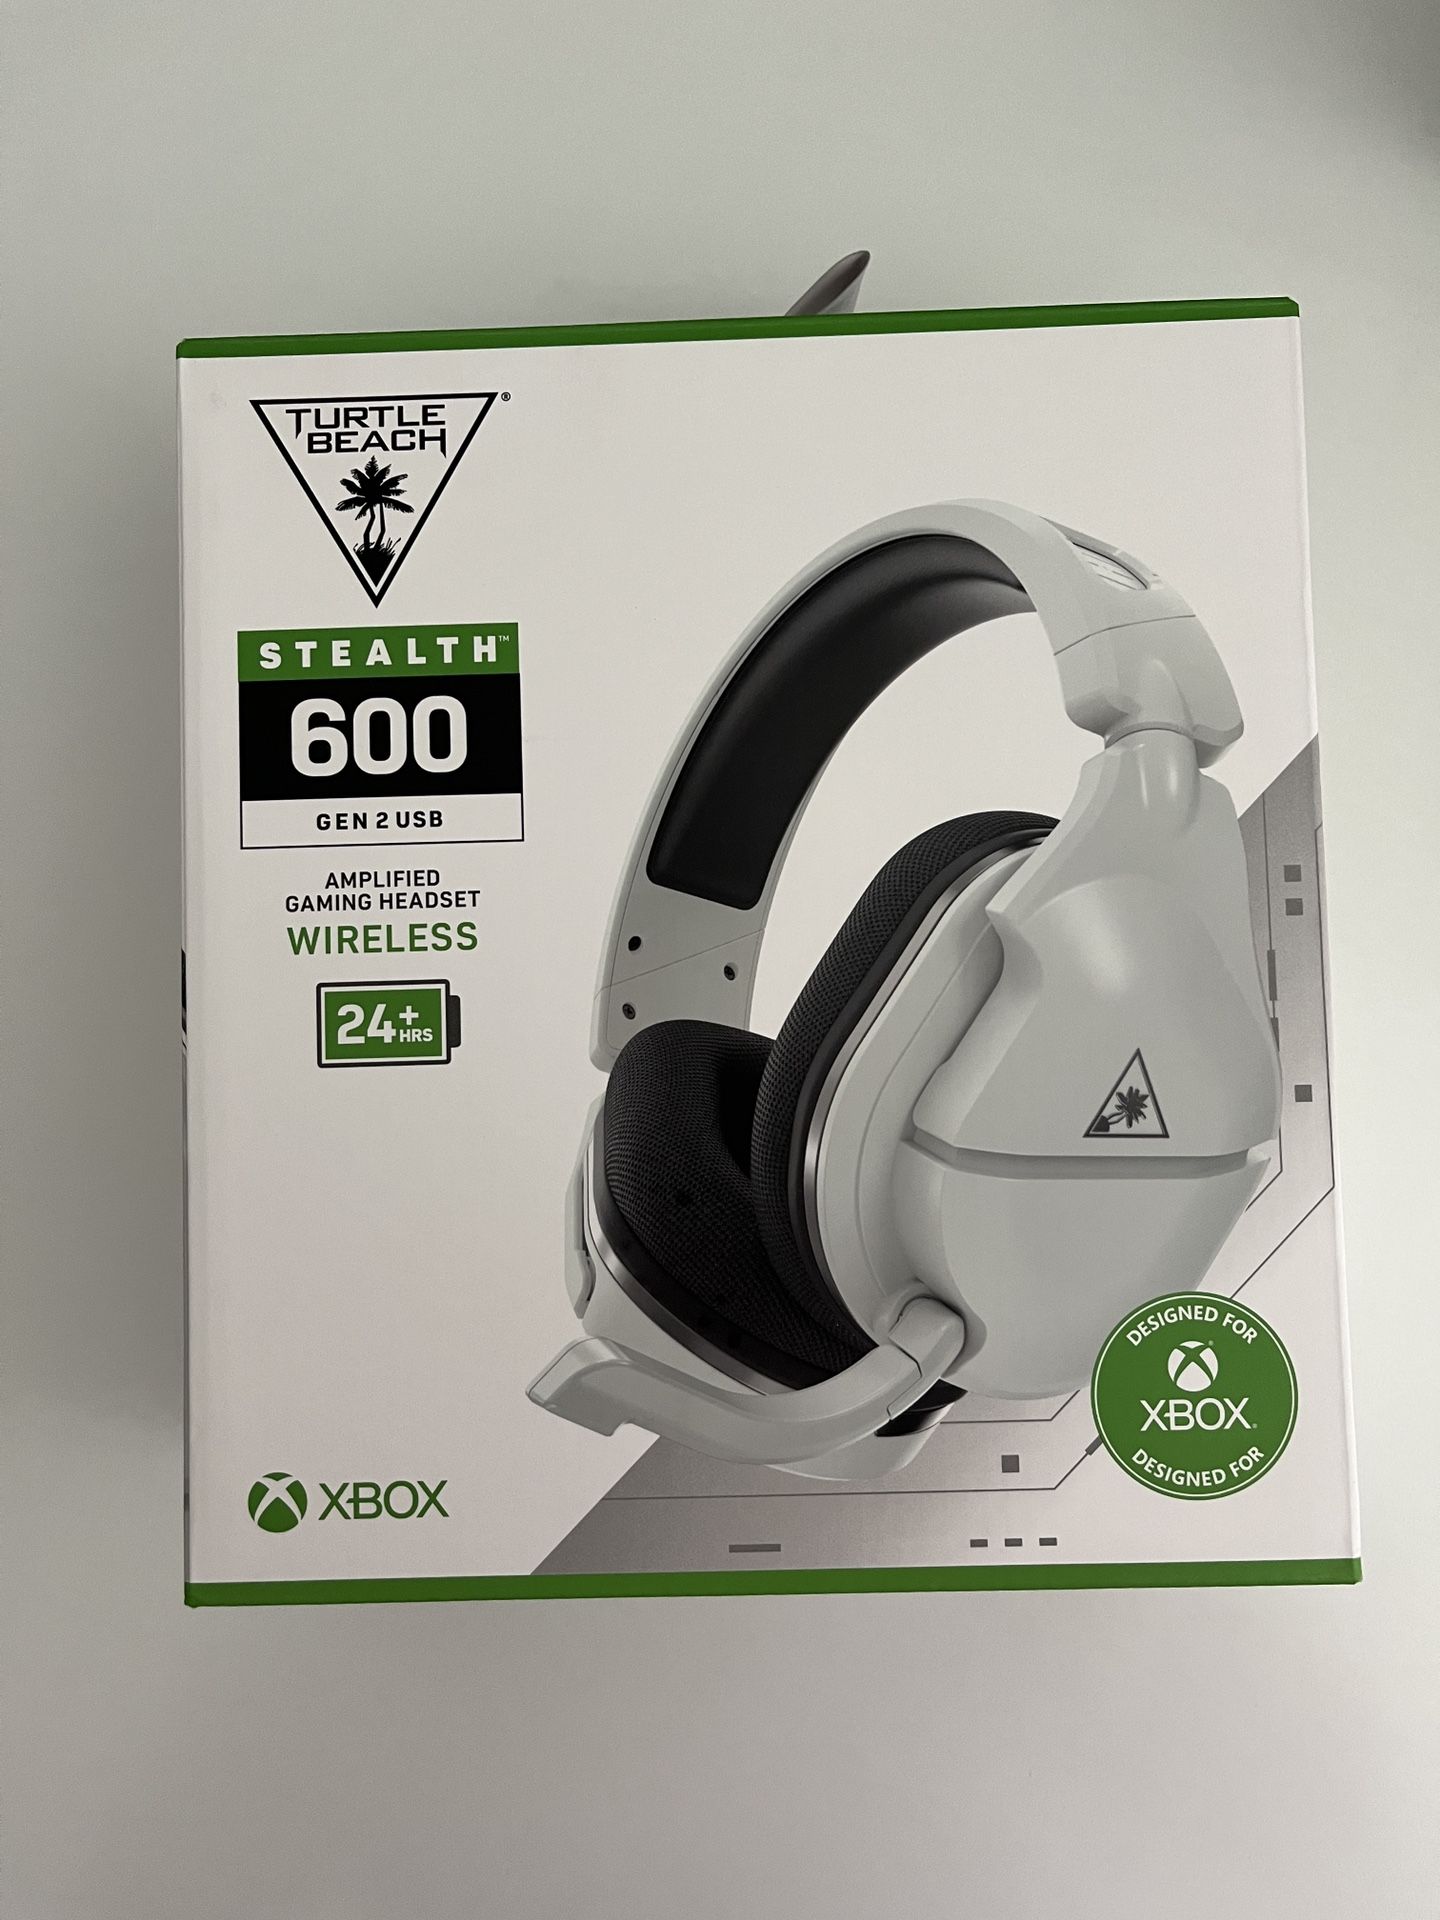 Turtle Beach Stealth 600 Gen 2 USB Wireless Amplified Gaming Headset - Xbox Series X, Xbox Series S, & Xbox One